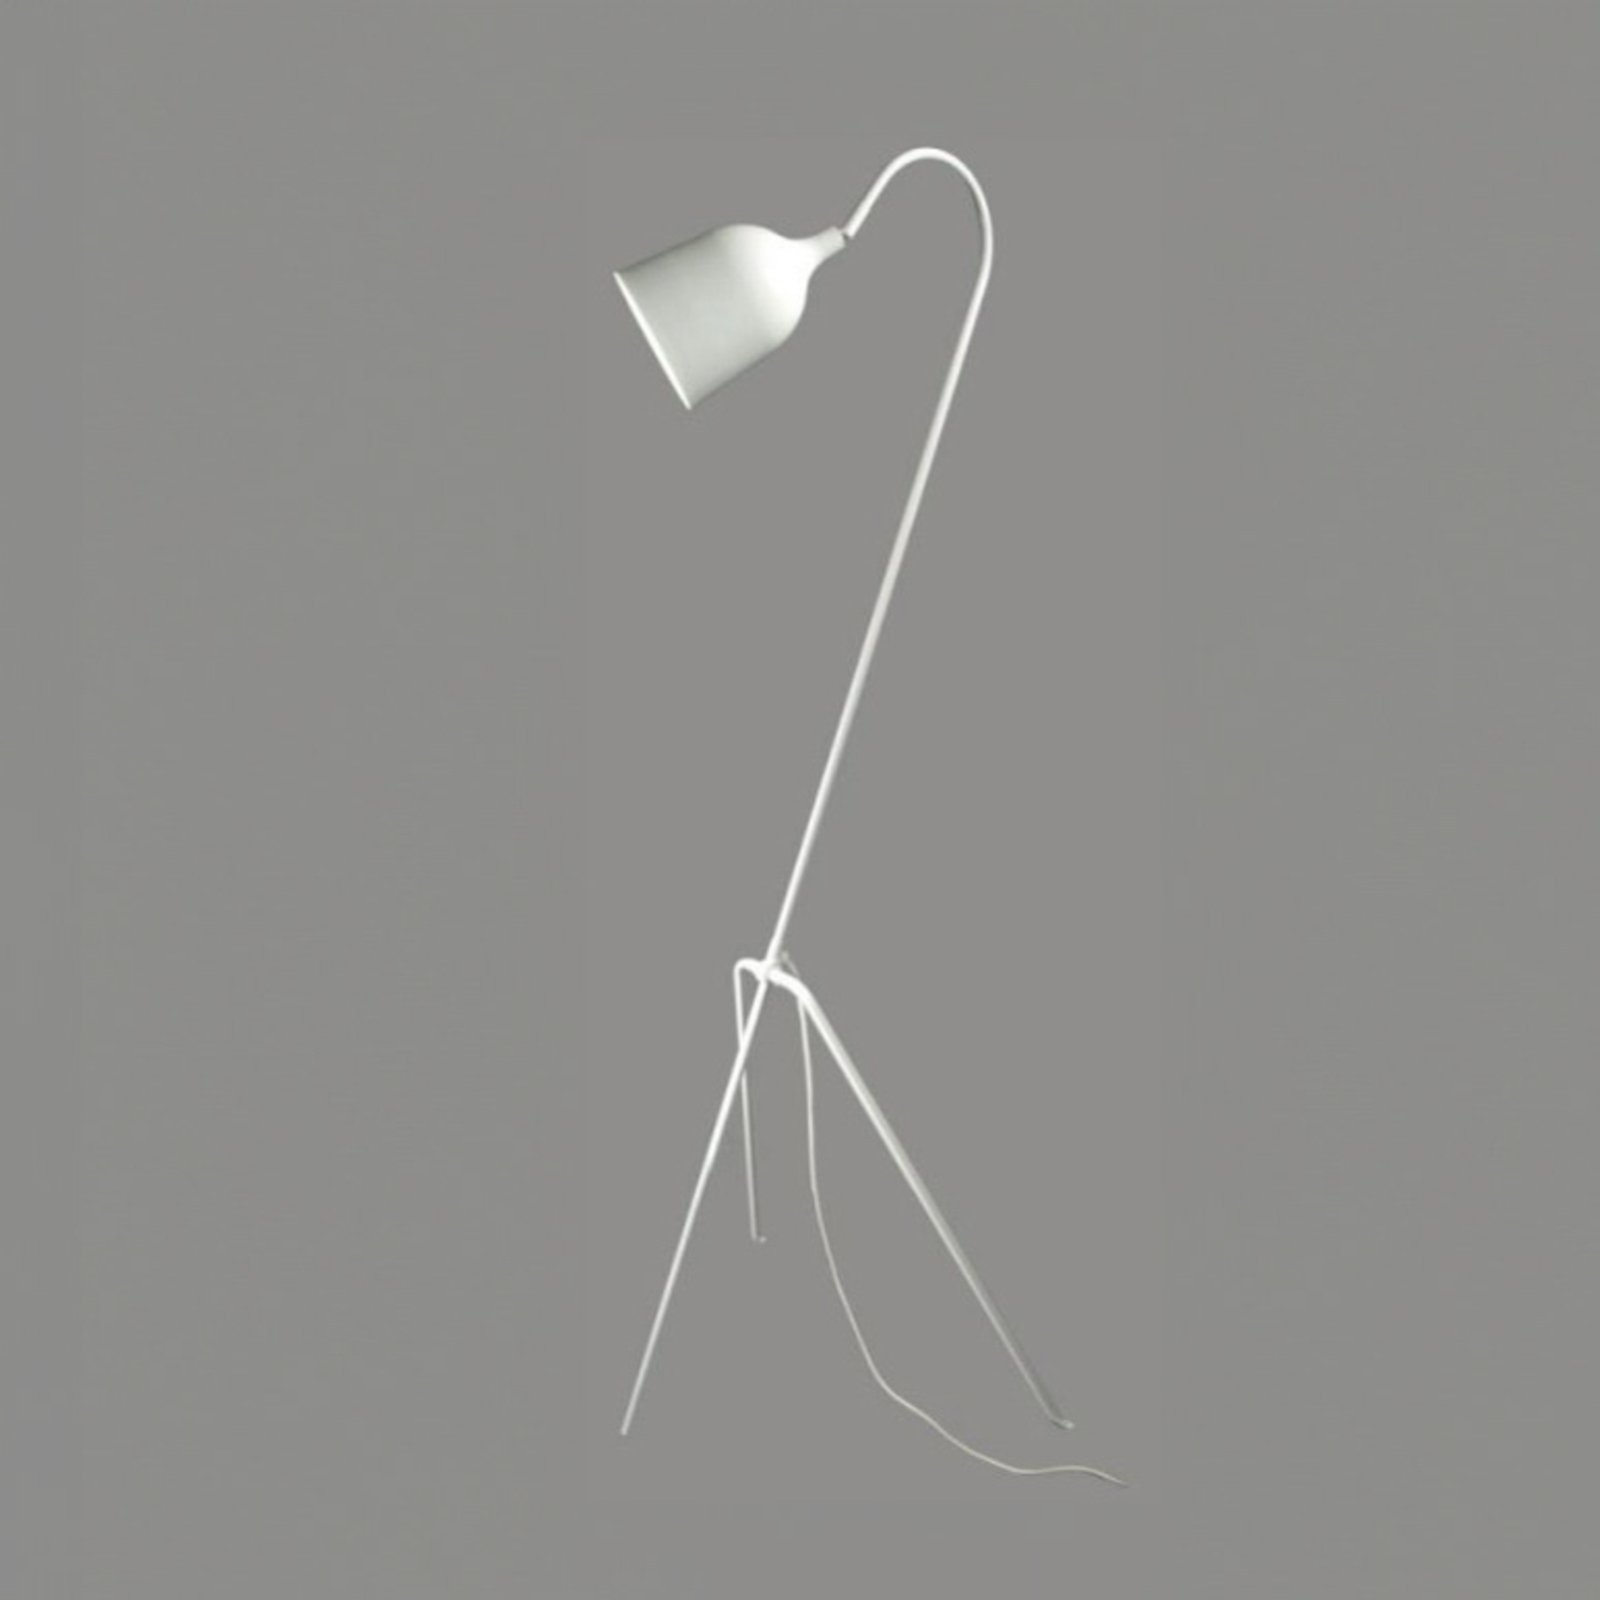 Aluminor Fifty lampe sur pied, blanche